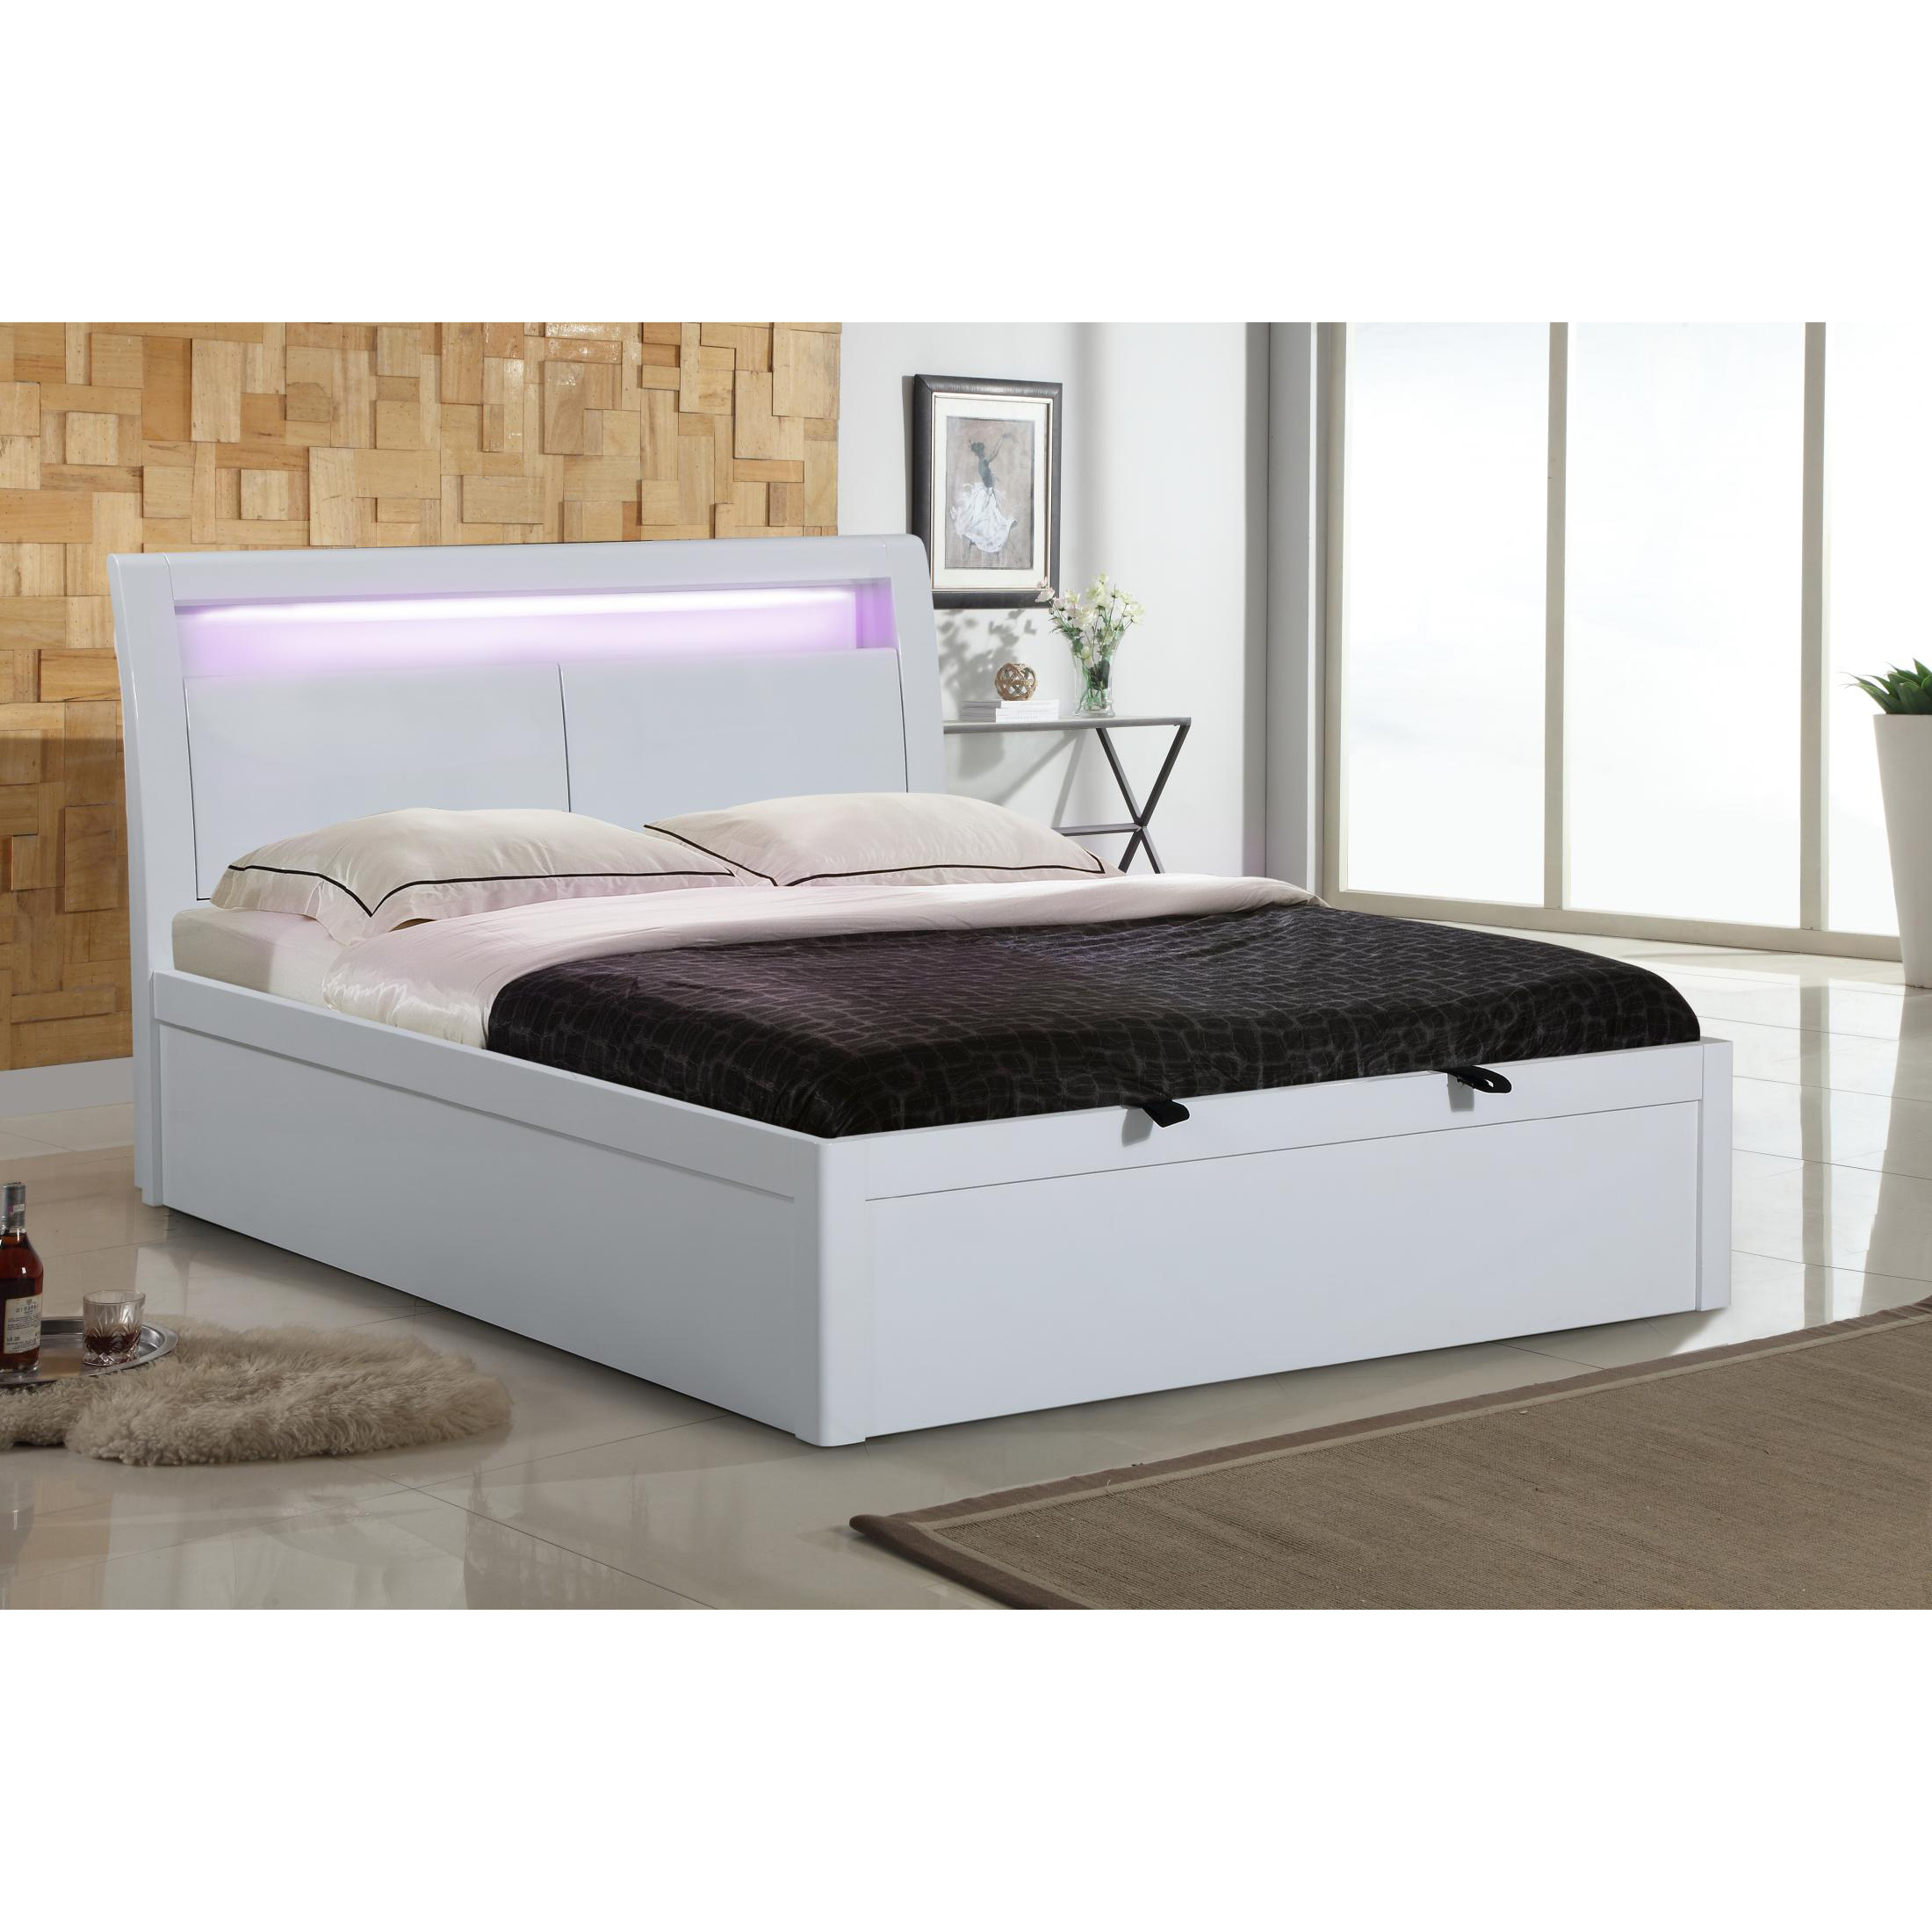 Tanya White High Gloss Ottoman Double Bed